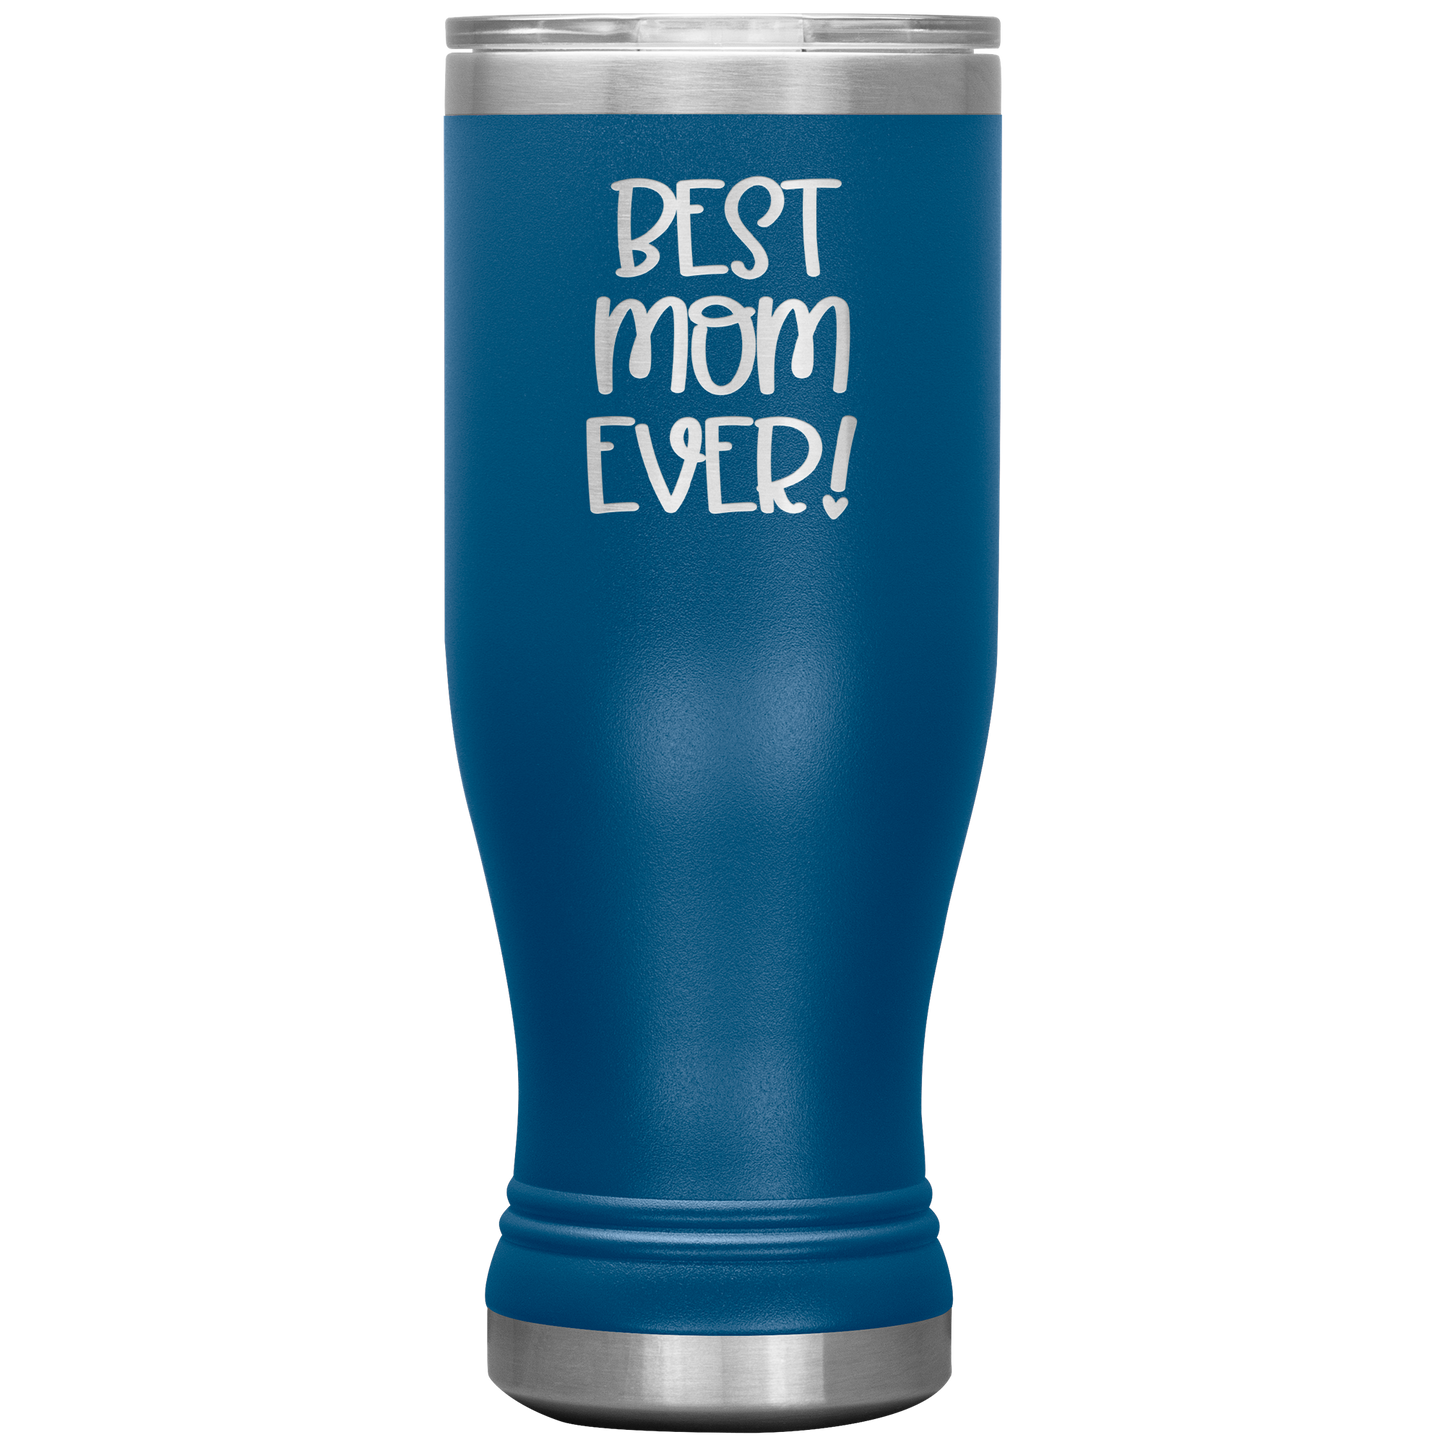 "Best Mom Ever!" Insulated Stainless Steel Boho Tumbler with Lid